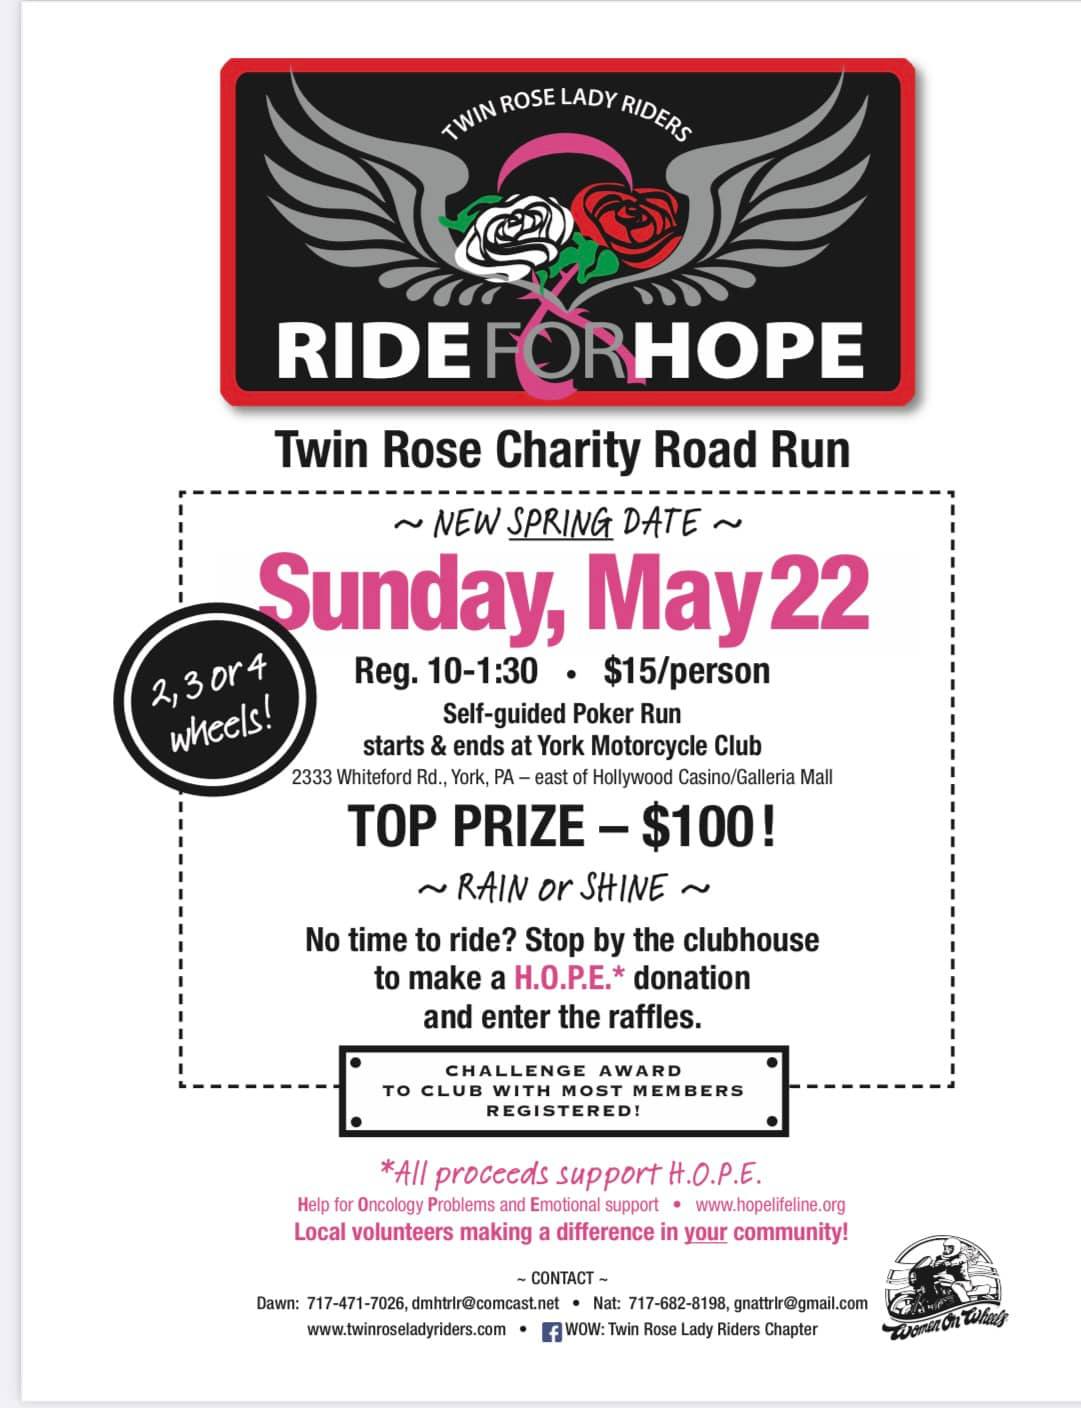 Twin Rose Lady Riders Ride for H.O.P.E.